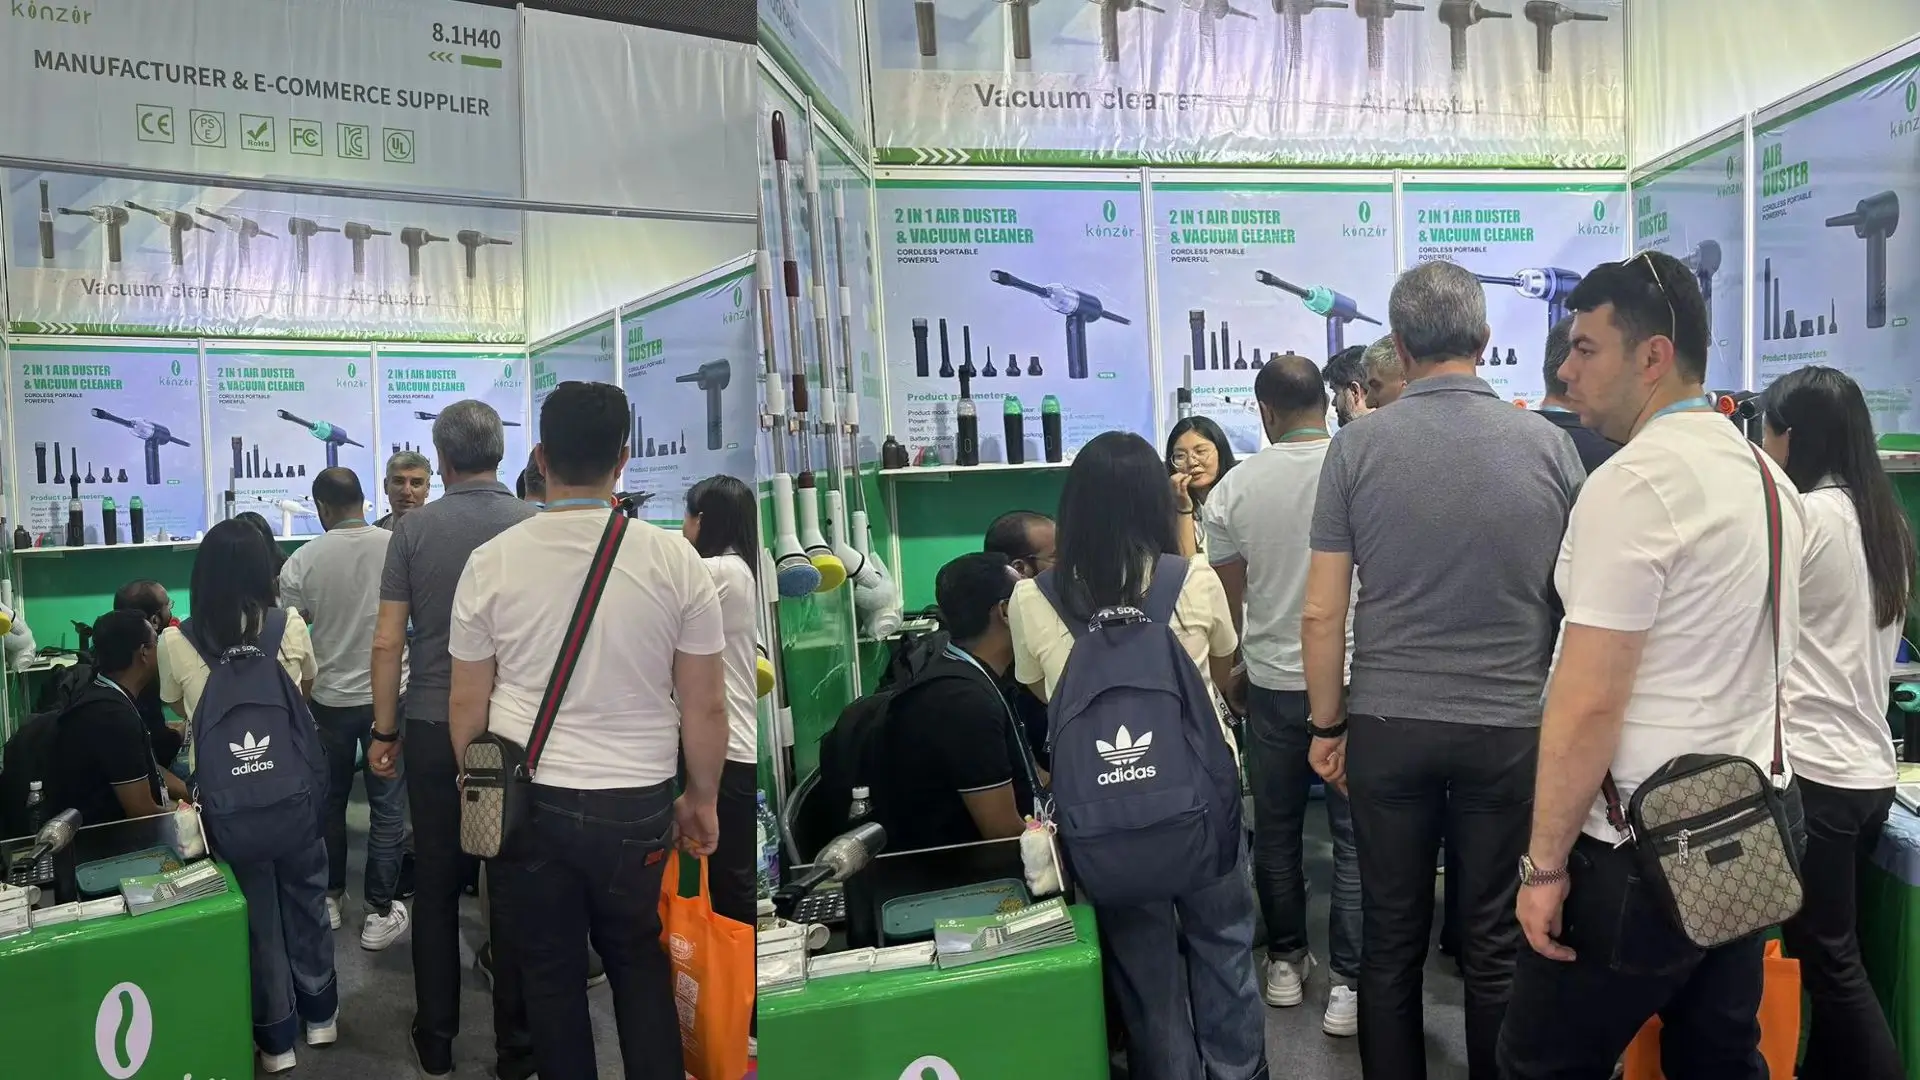 The 135th Canton Fair Post Show Report from Kinzir: Gain Insights into Kinzir's Performance and Achievements at One of the World's Largest Trade Events - Kinzir Exhibition - 1